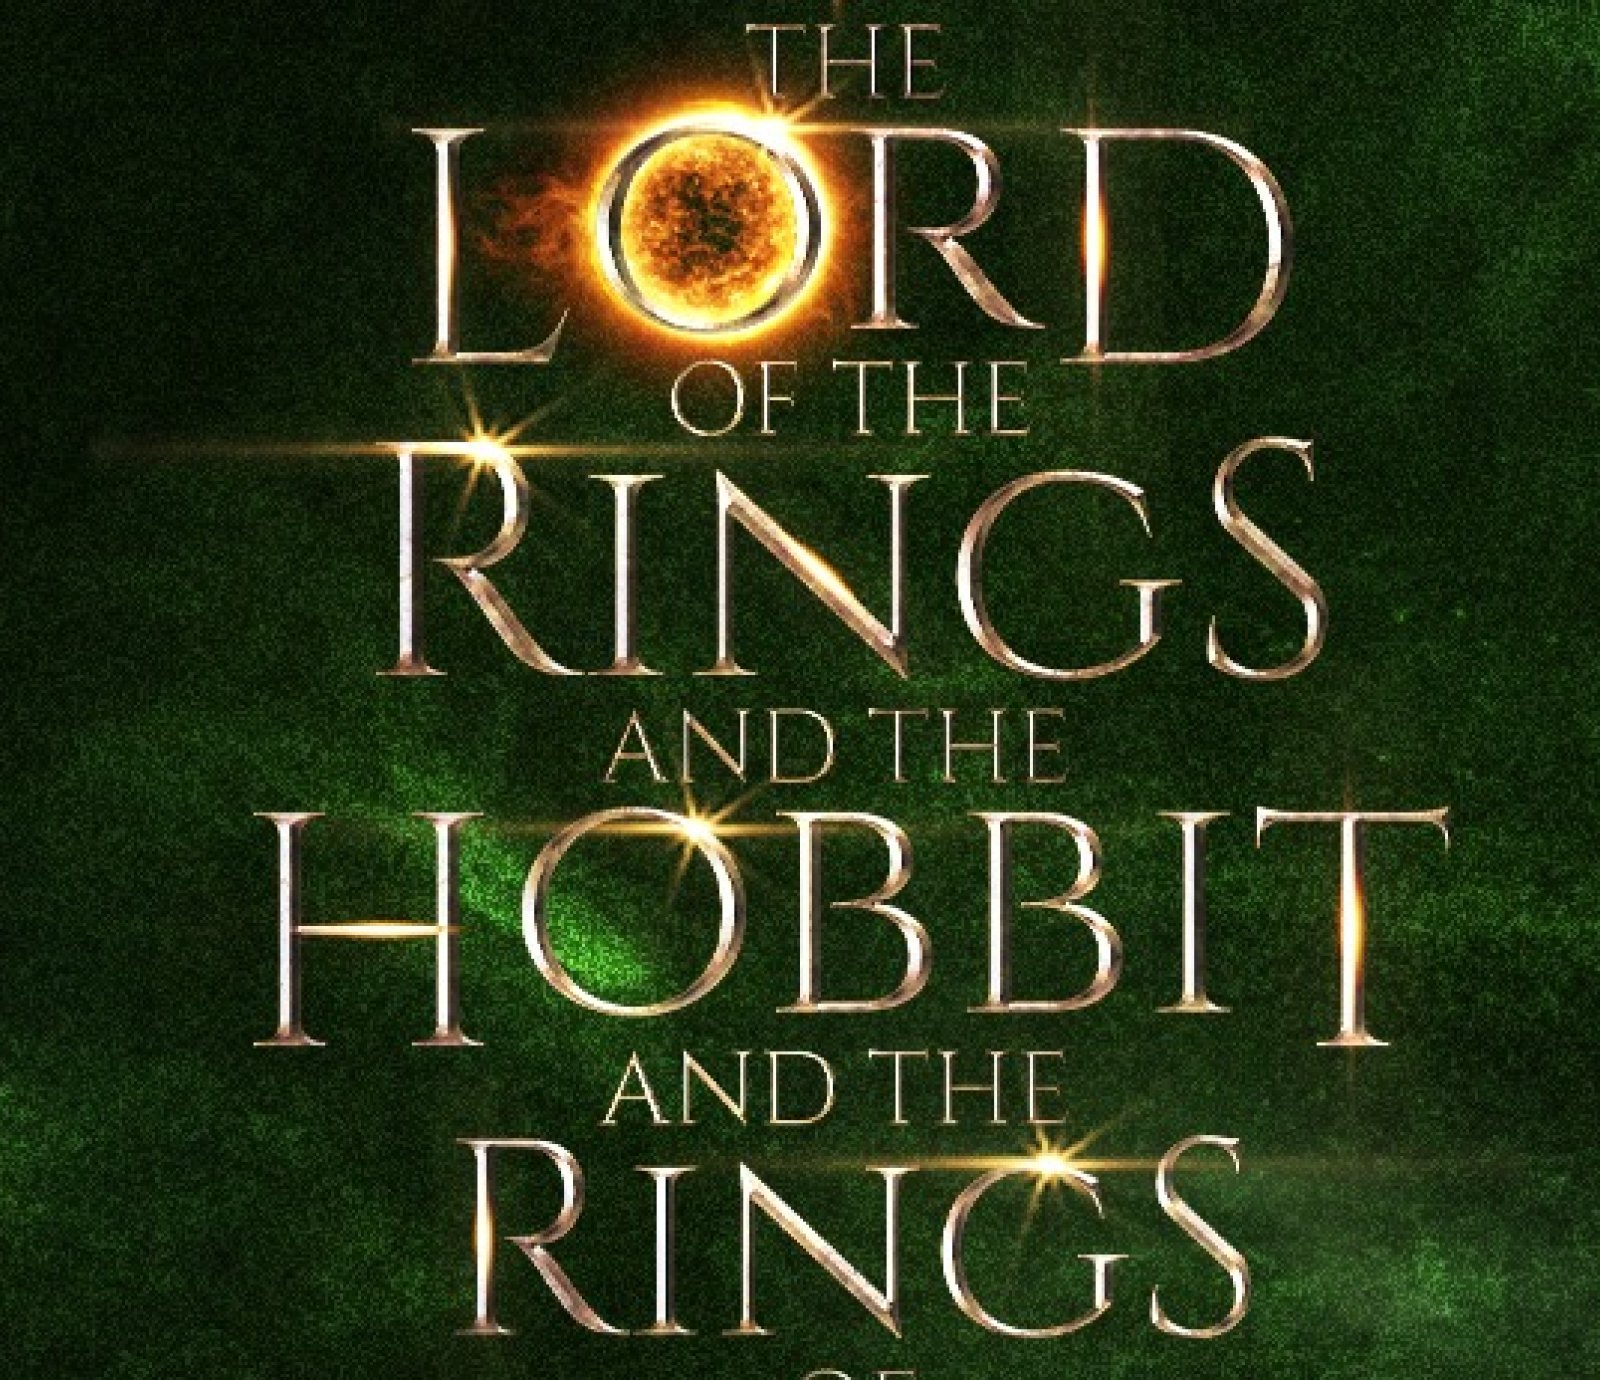 The Music Of The Lord Of The Rings And The Hobbit And The Rings